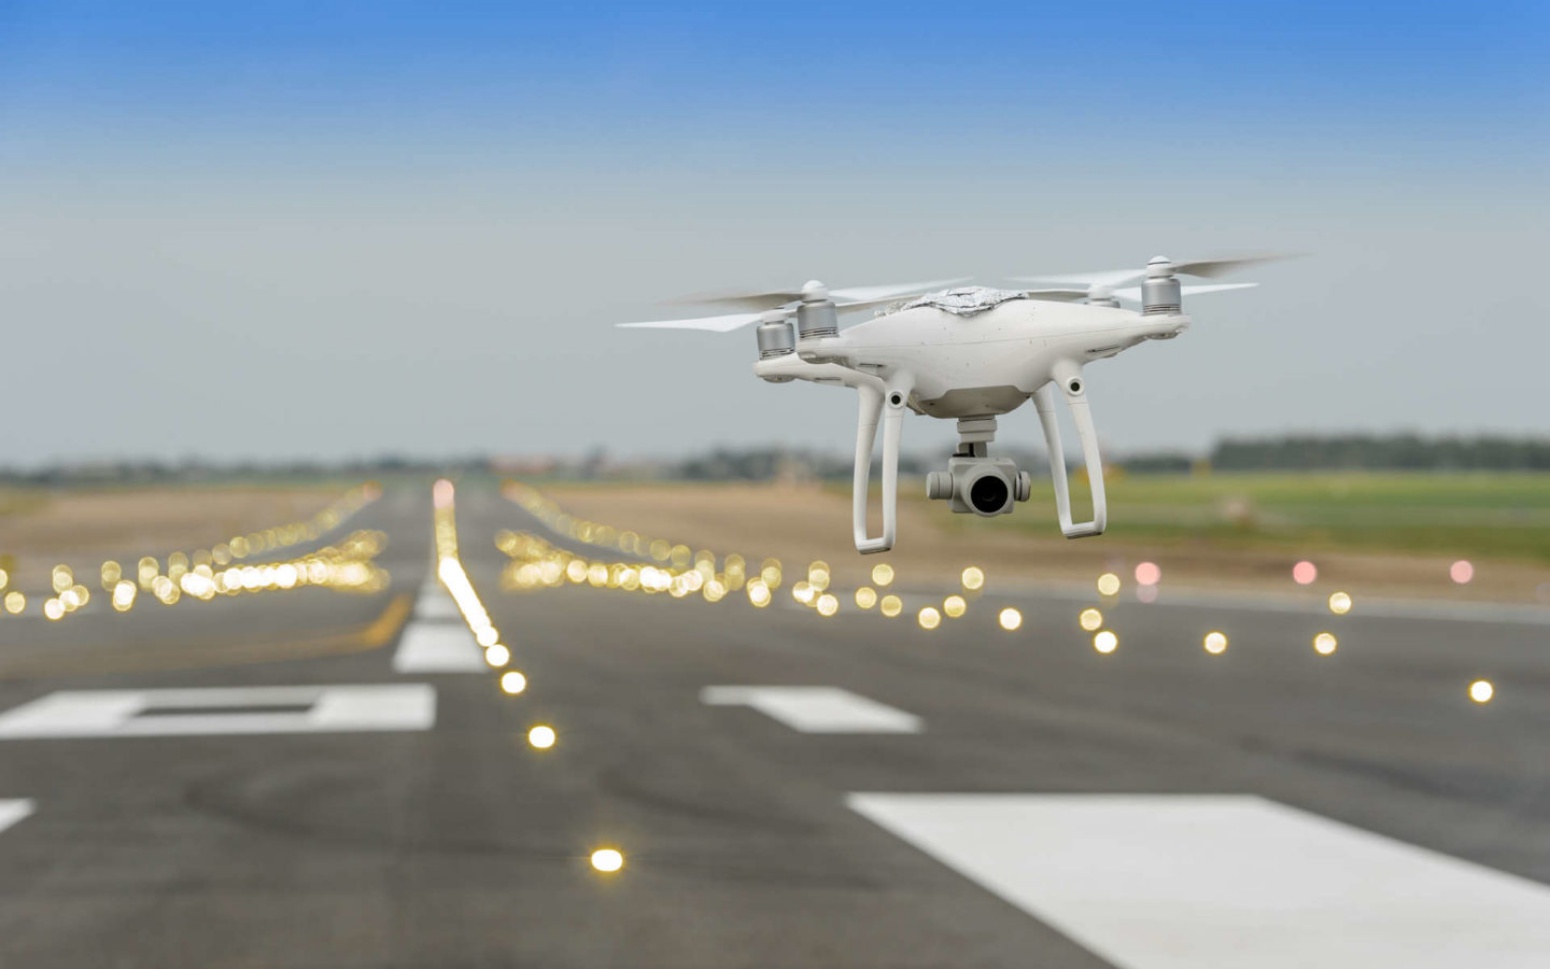 The benefits of using drones at airports